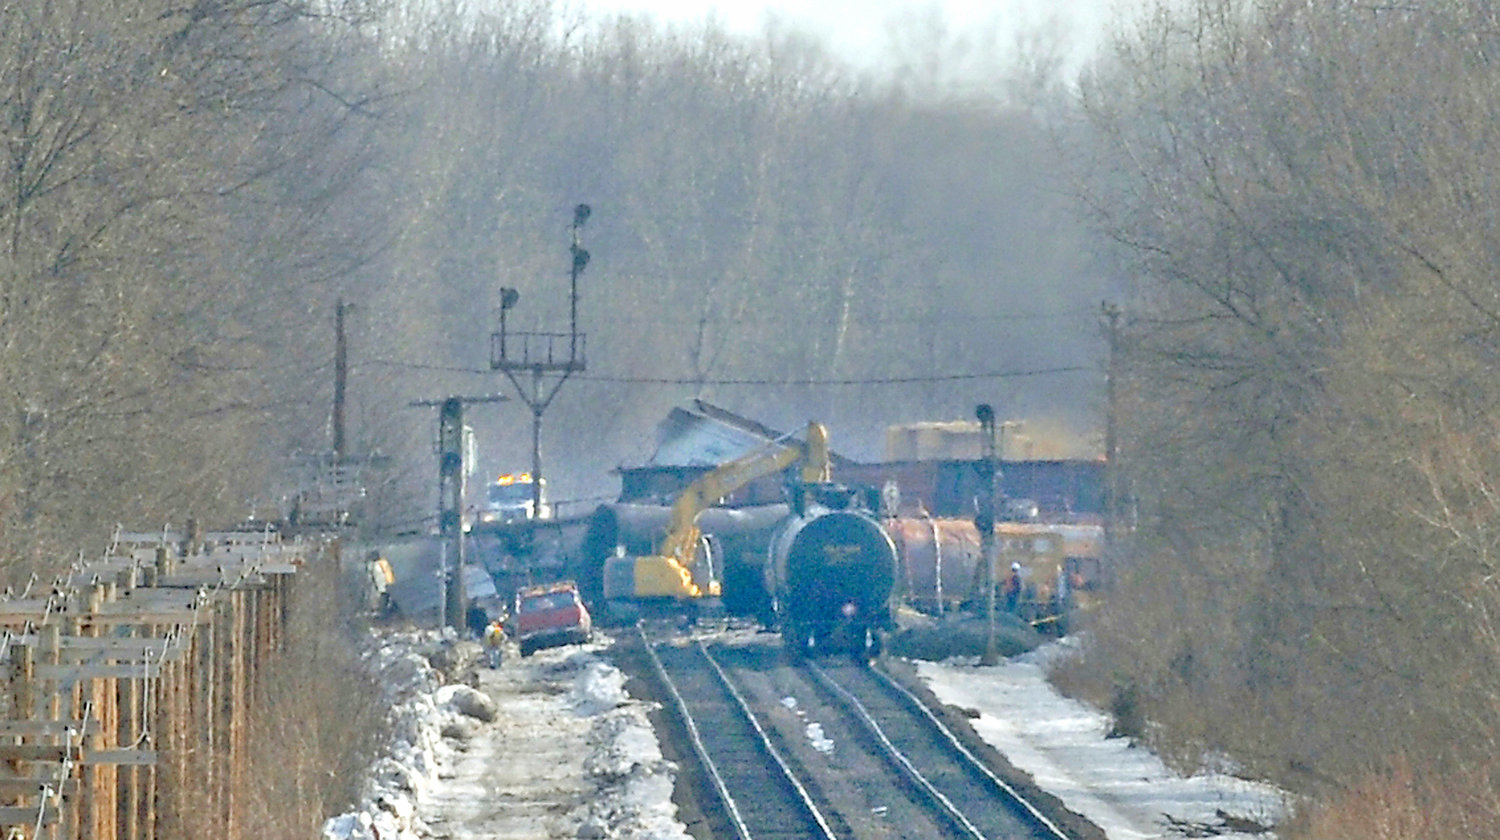 In this file photo from March 13, 2007, emergency personnel clean up a train derailment and hazardous materials spill on a CSX railroad in the City of Oneida.